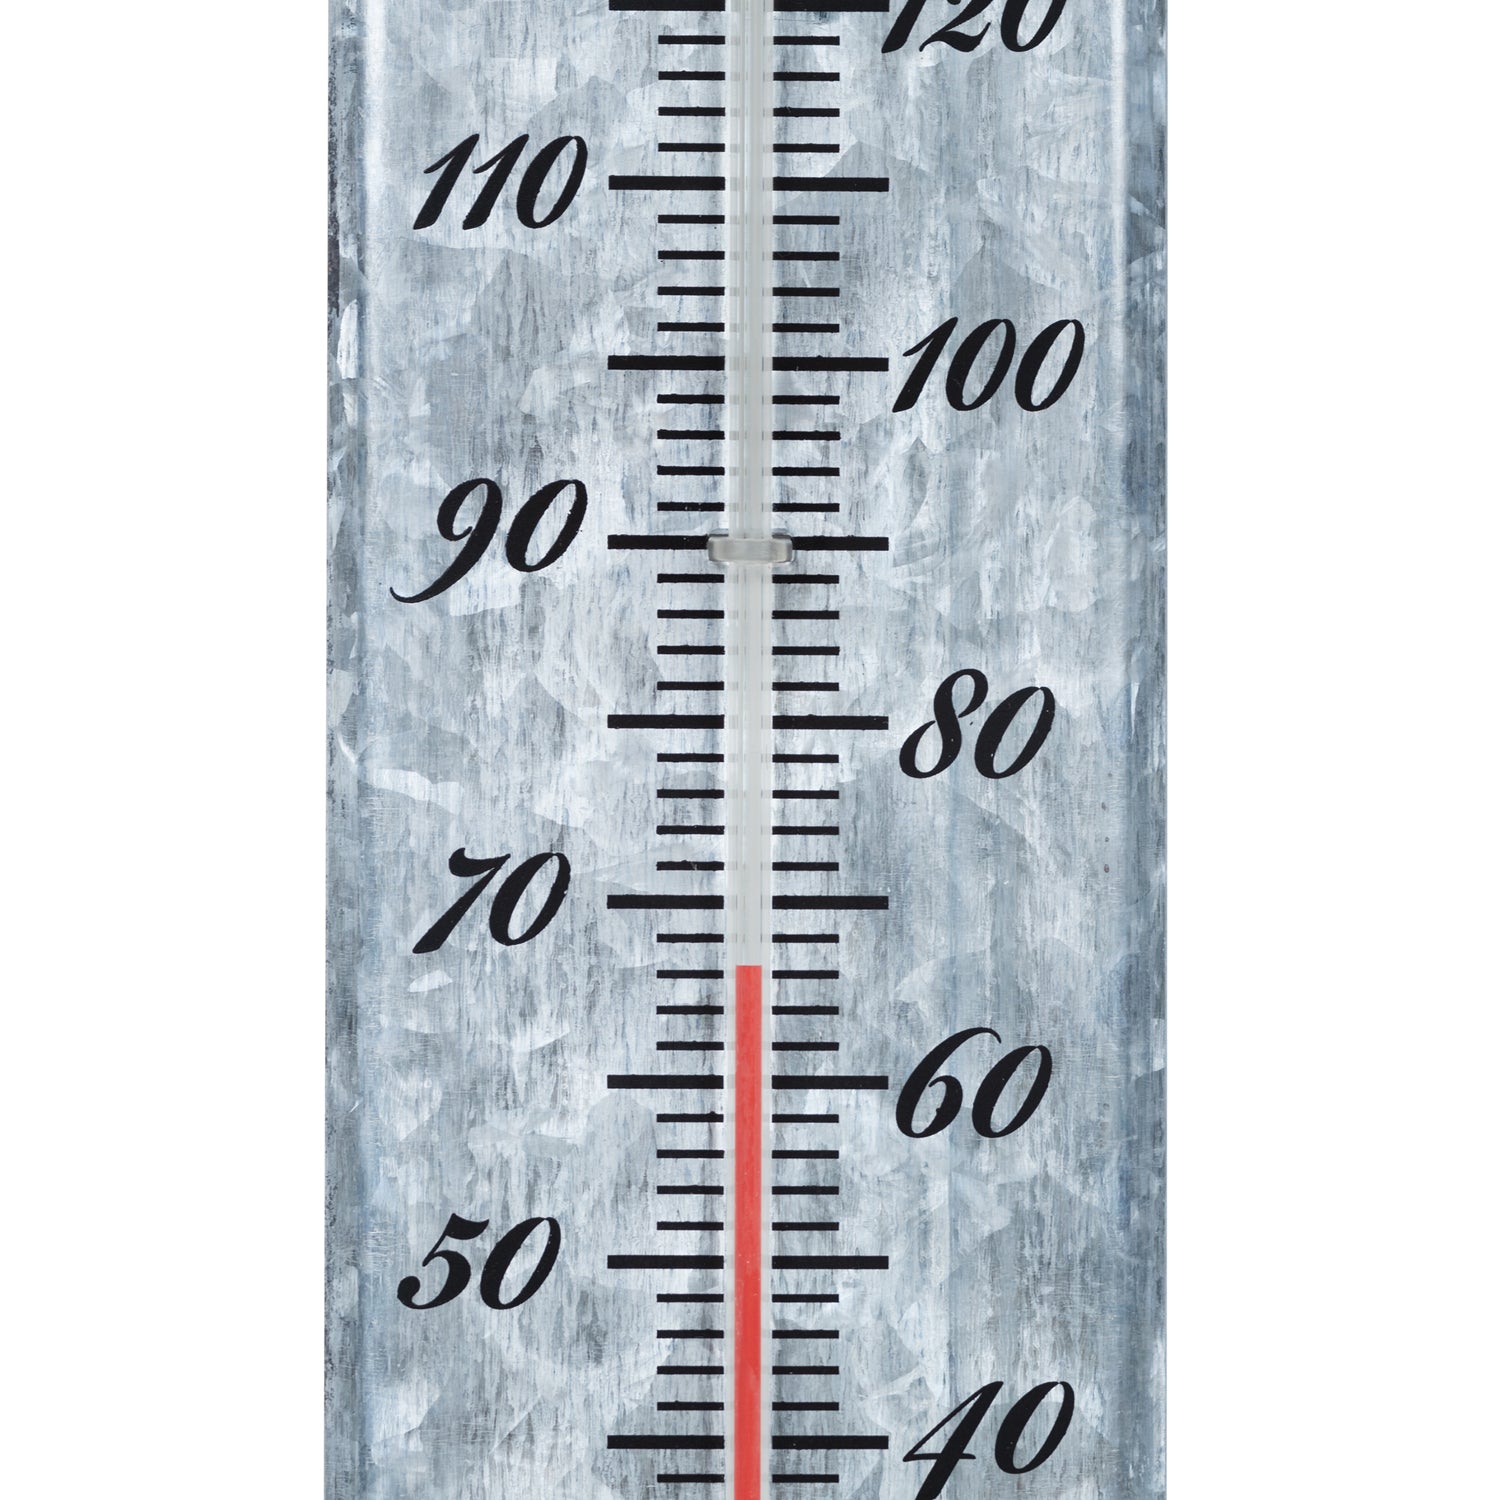 La Crosse Technology Outdoor Thermometers 204-1523-INT